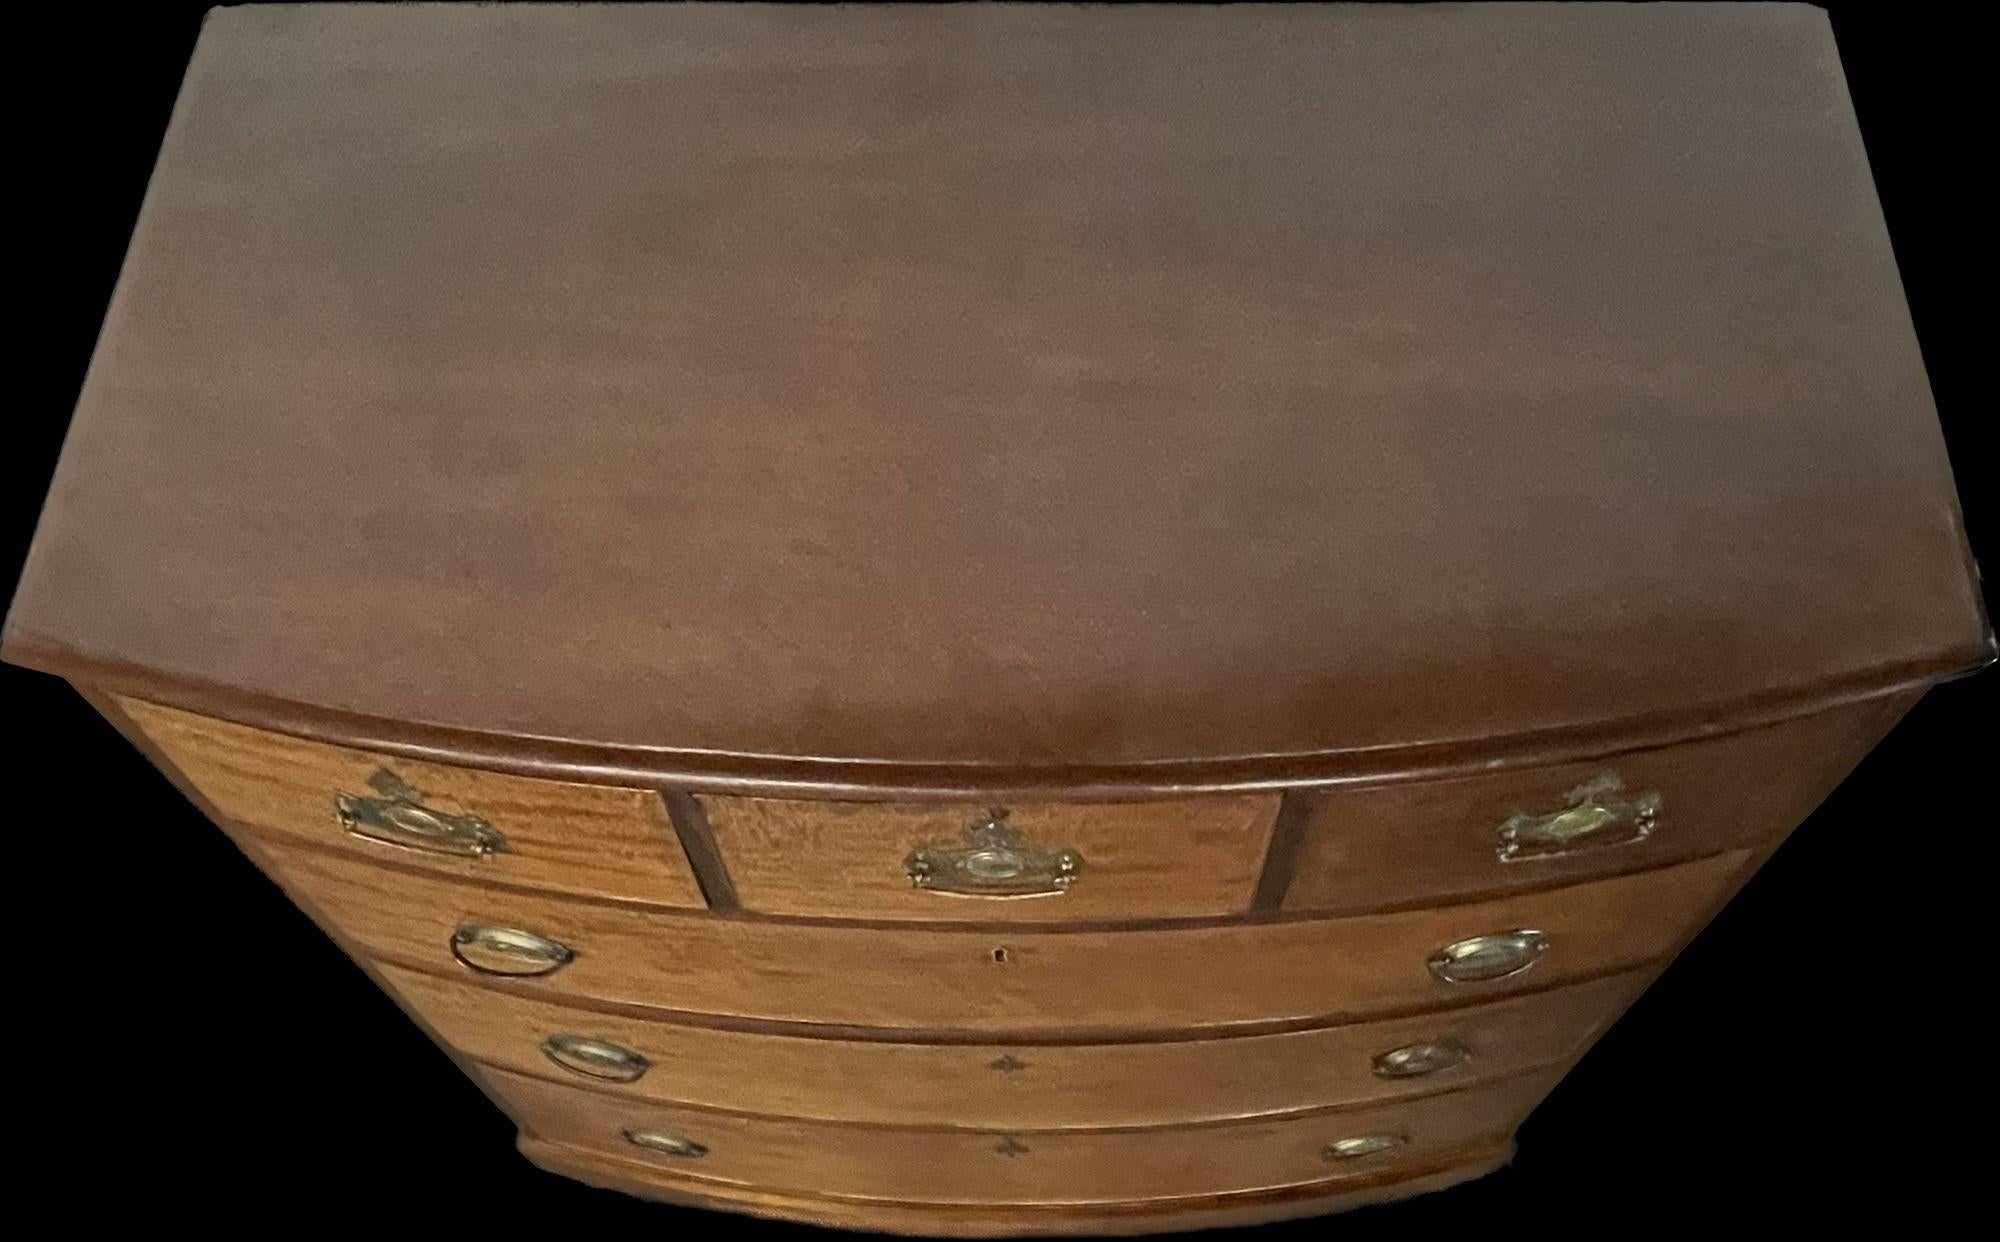 Late 19th Century 19th Century Georgian Bow Front Chest, Mahogany, Rare 3 over 3 Drawer